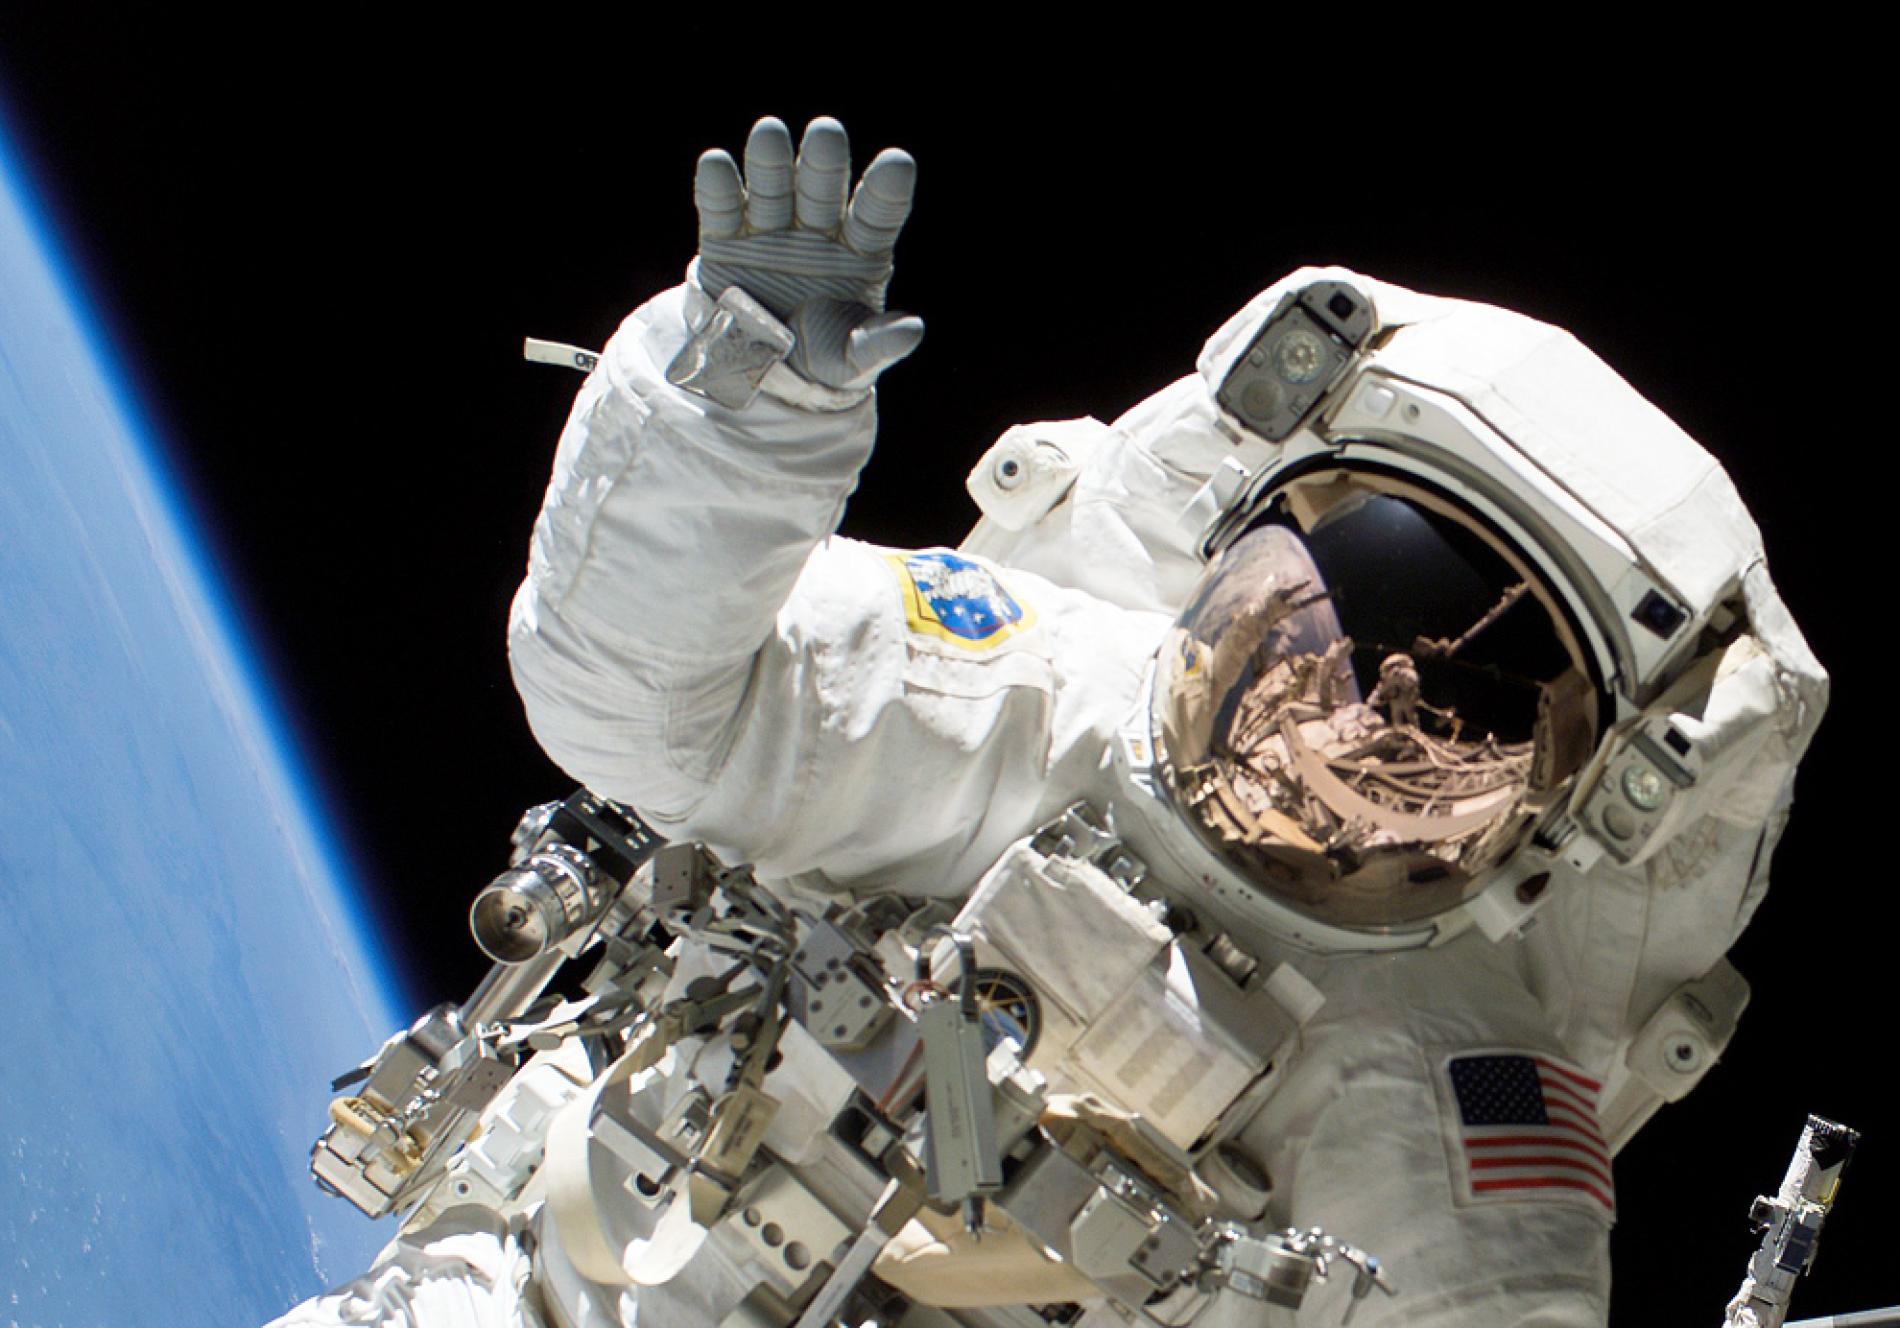 Astronauts could benefit from using remote control sex toys ...